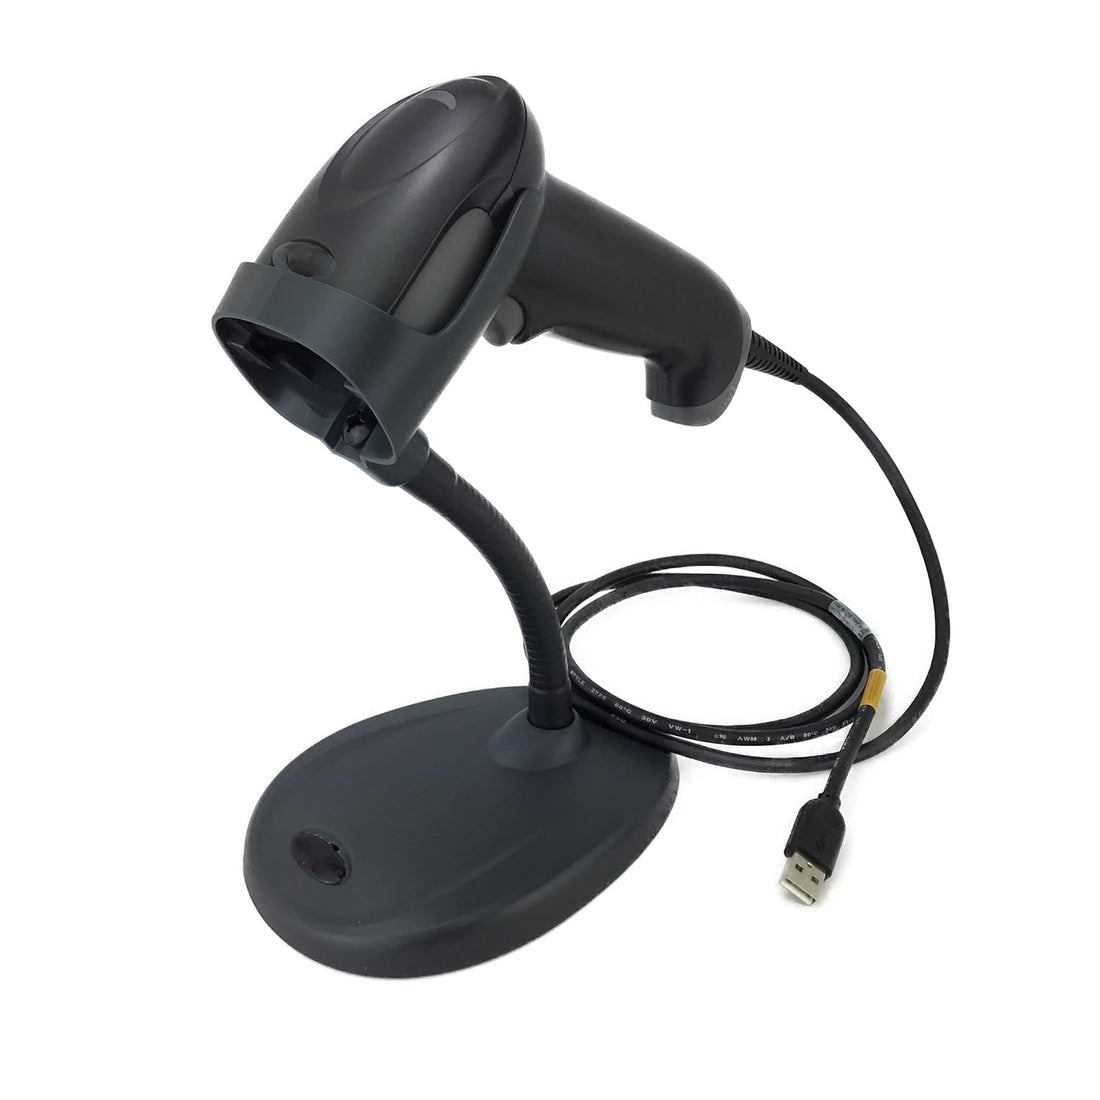 Honeywell Voyager Extreme Performance (XP) 1470g Handheld Corded Barcode Scanner (2D, 1D, PDF, Postal), Includes Stand and USB Cable